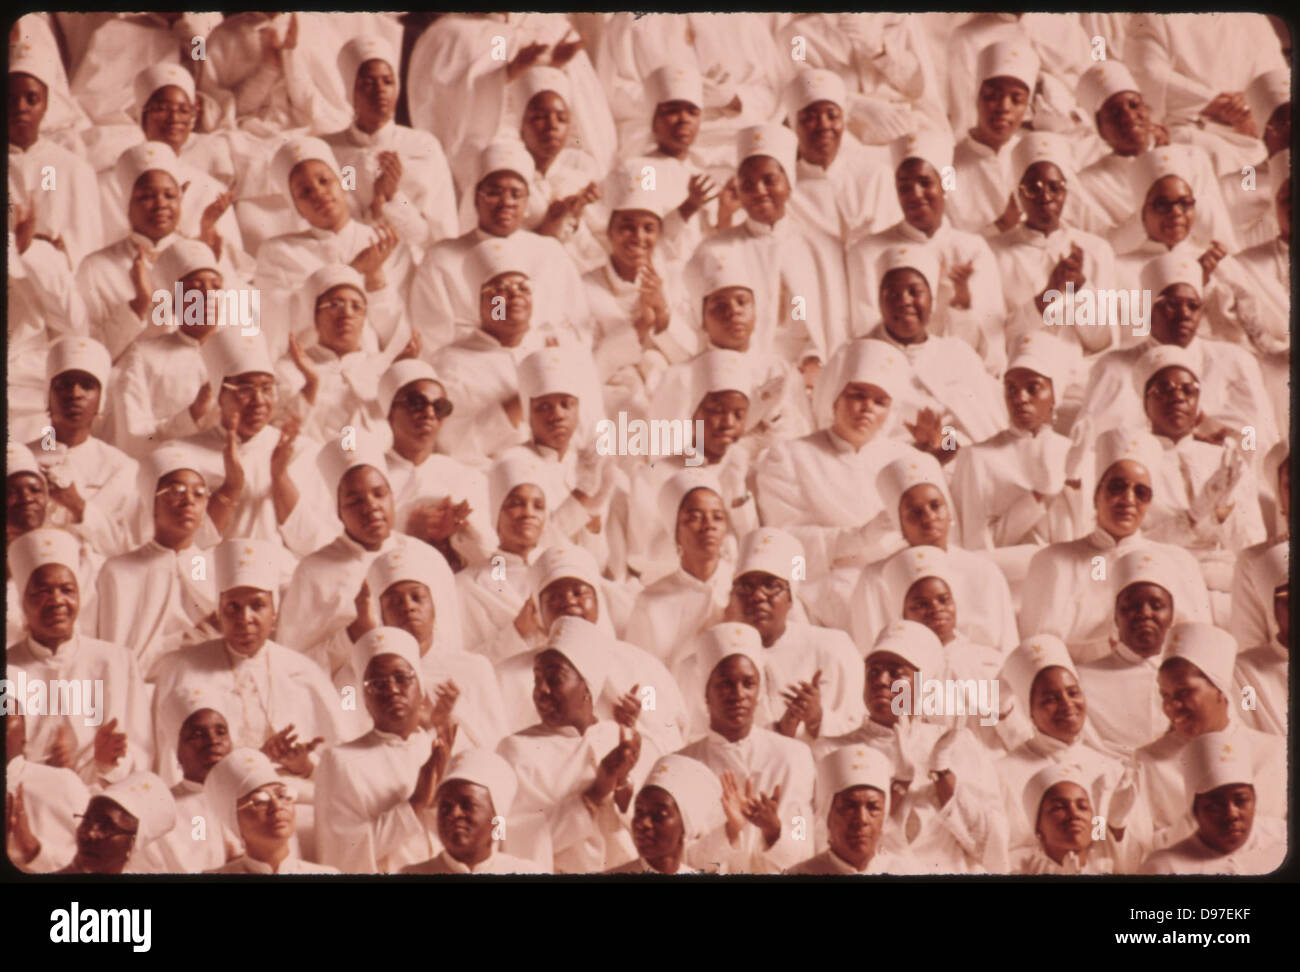 Black Muslim Women Dressed In White Applaud Elijah Muhammad During The Delivery Of His Annual Savior's Day Message In Chicago, 0 Stock Photo